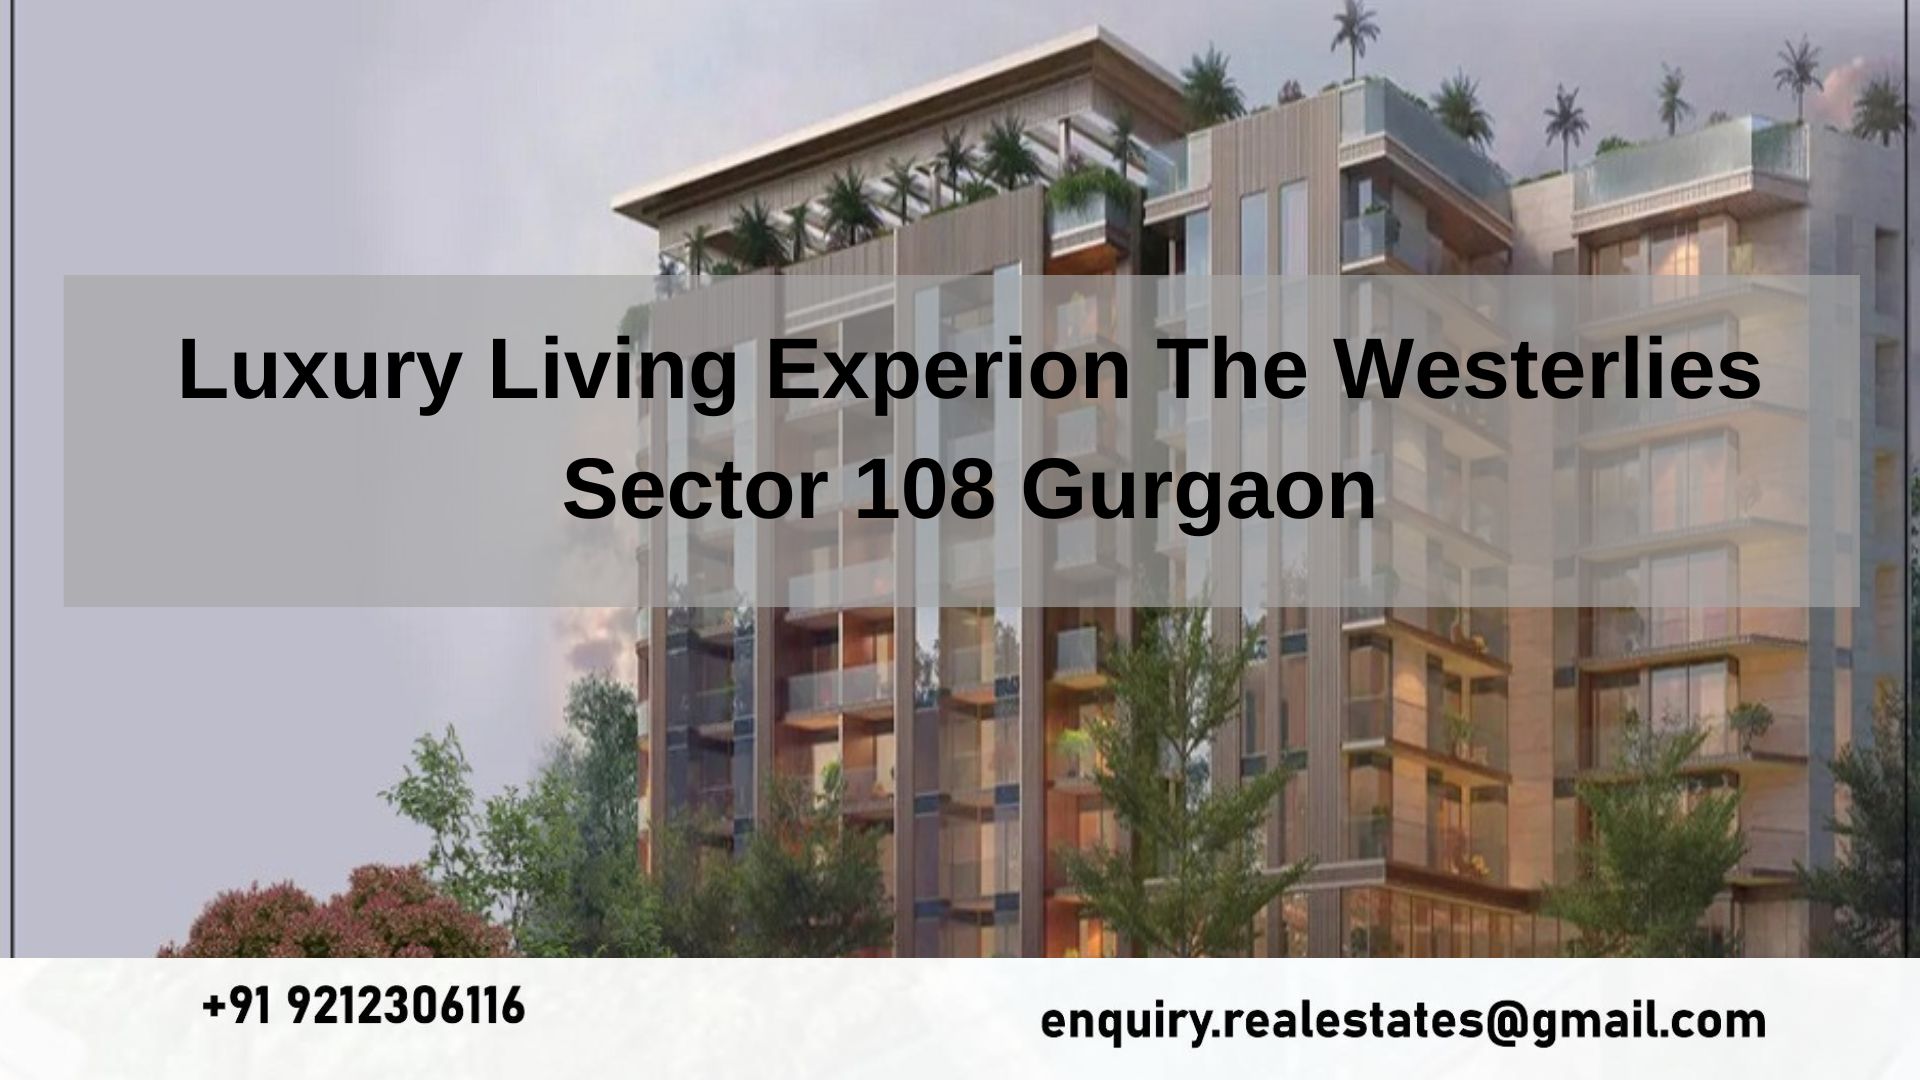 Luxury Living Experion The Westerlies Sector 108 Gurgaon